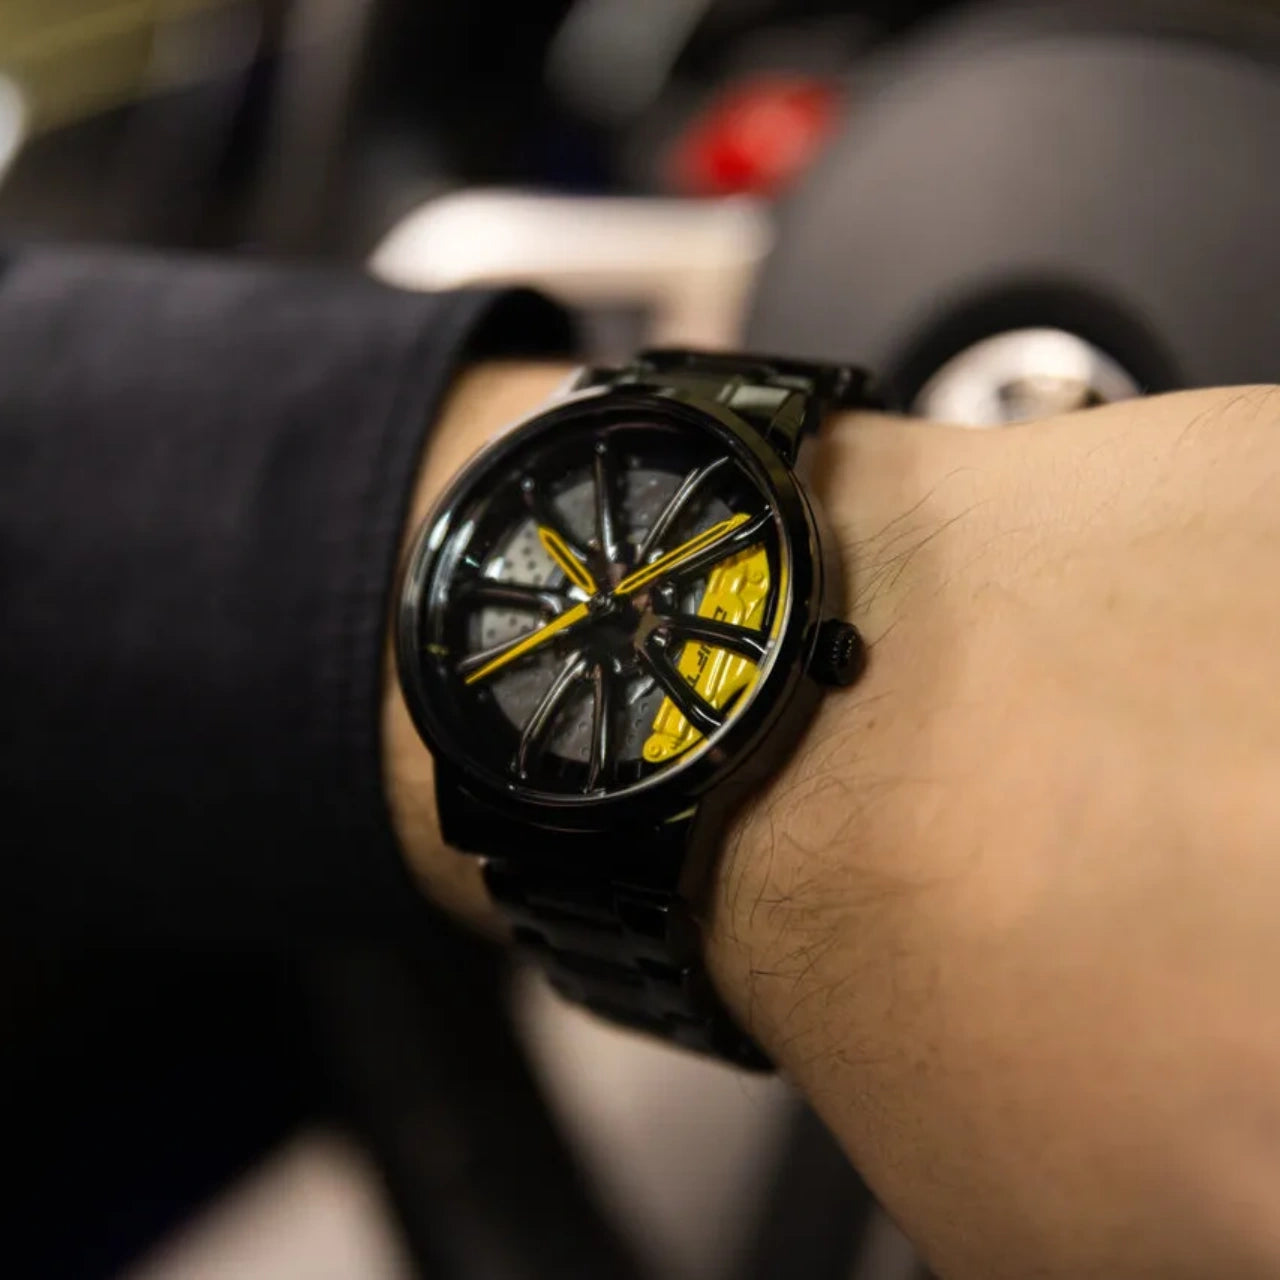 Rev up your auto fashion with our bold yellow Performance GT Rim Watch! Engineered by a German startup, these precision watches are the perfect choice for motorsport, tuning, and auto fans. Get ready to ignite your style! #id_46744365433162